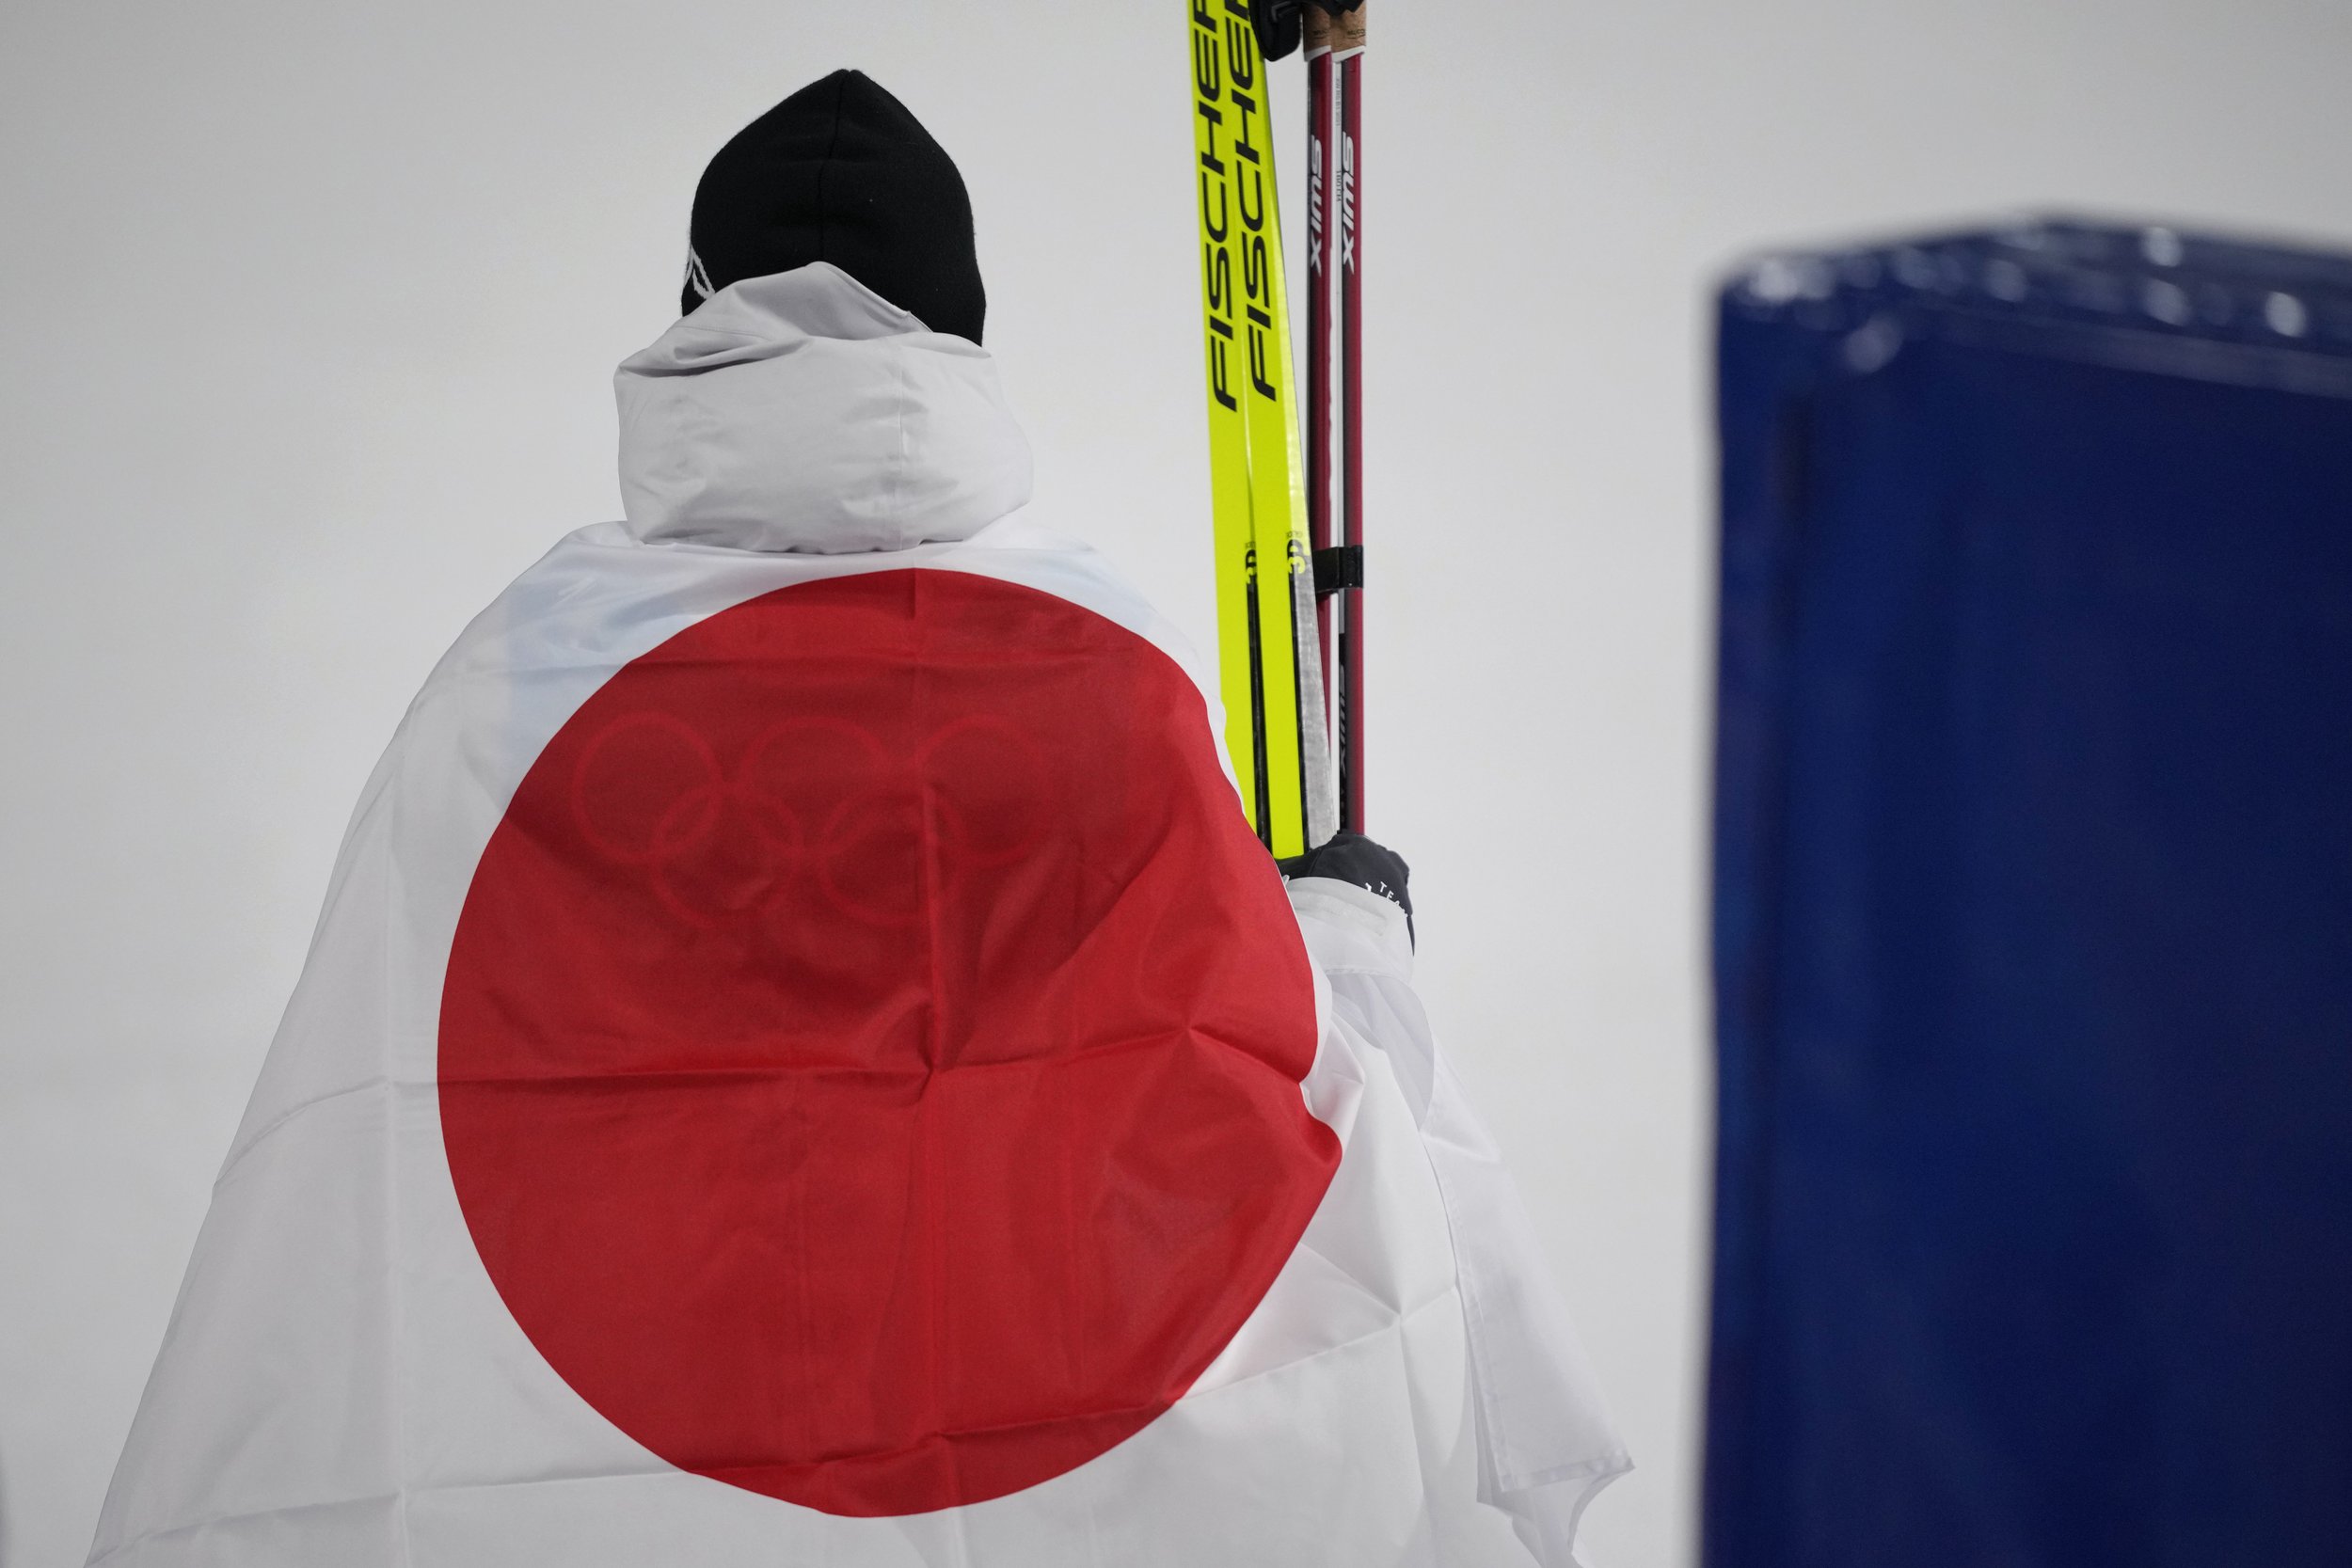  Bronze medal finisher Japan's Akito Watabe wraps himself in a flag during a venue ceremony after the cross-country skiing portion of the individual Gundersen large hill/10km competition at the 2022 Winter Olympics, Tuesday, Feb. 15, 2022, in Zhangji